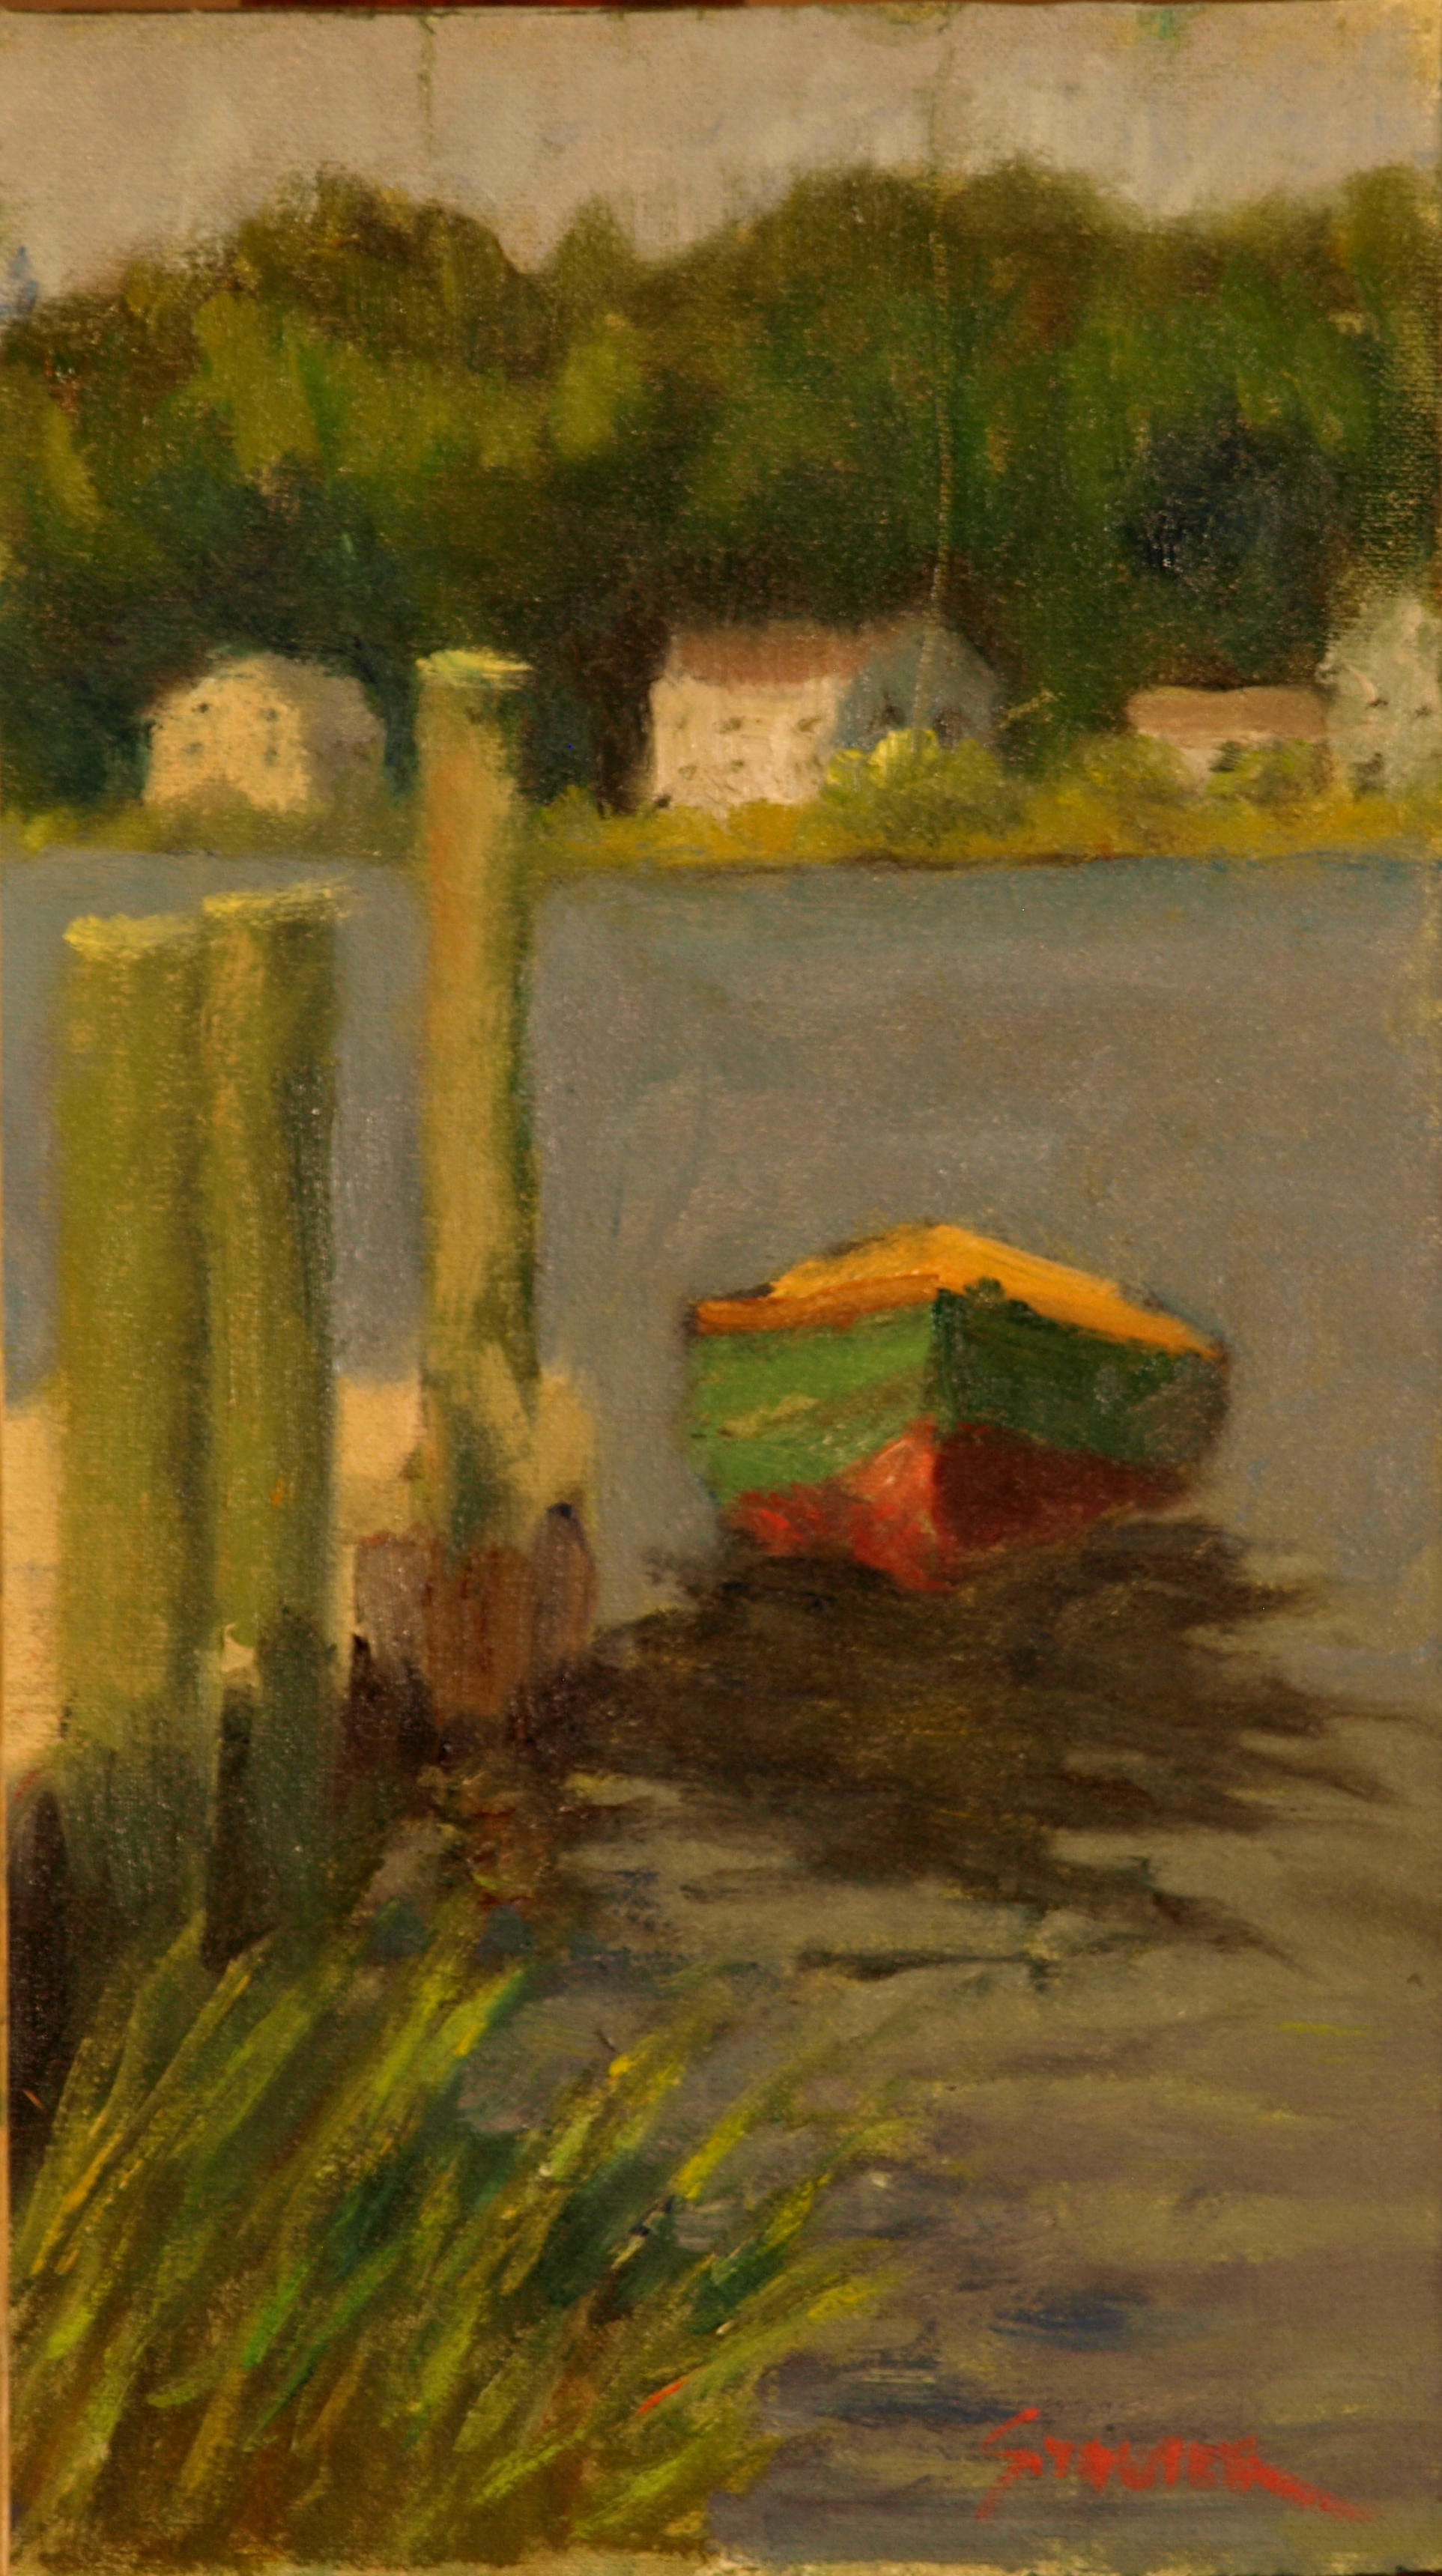 Dockside Dory, Oil on Canvas on Panel, 14 x 8 Inches, by Richard Stalter, $225